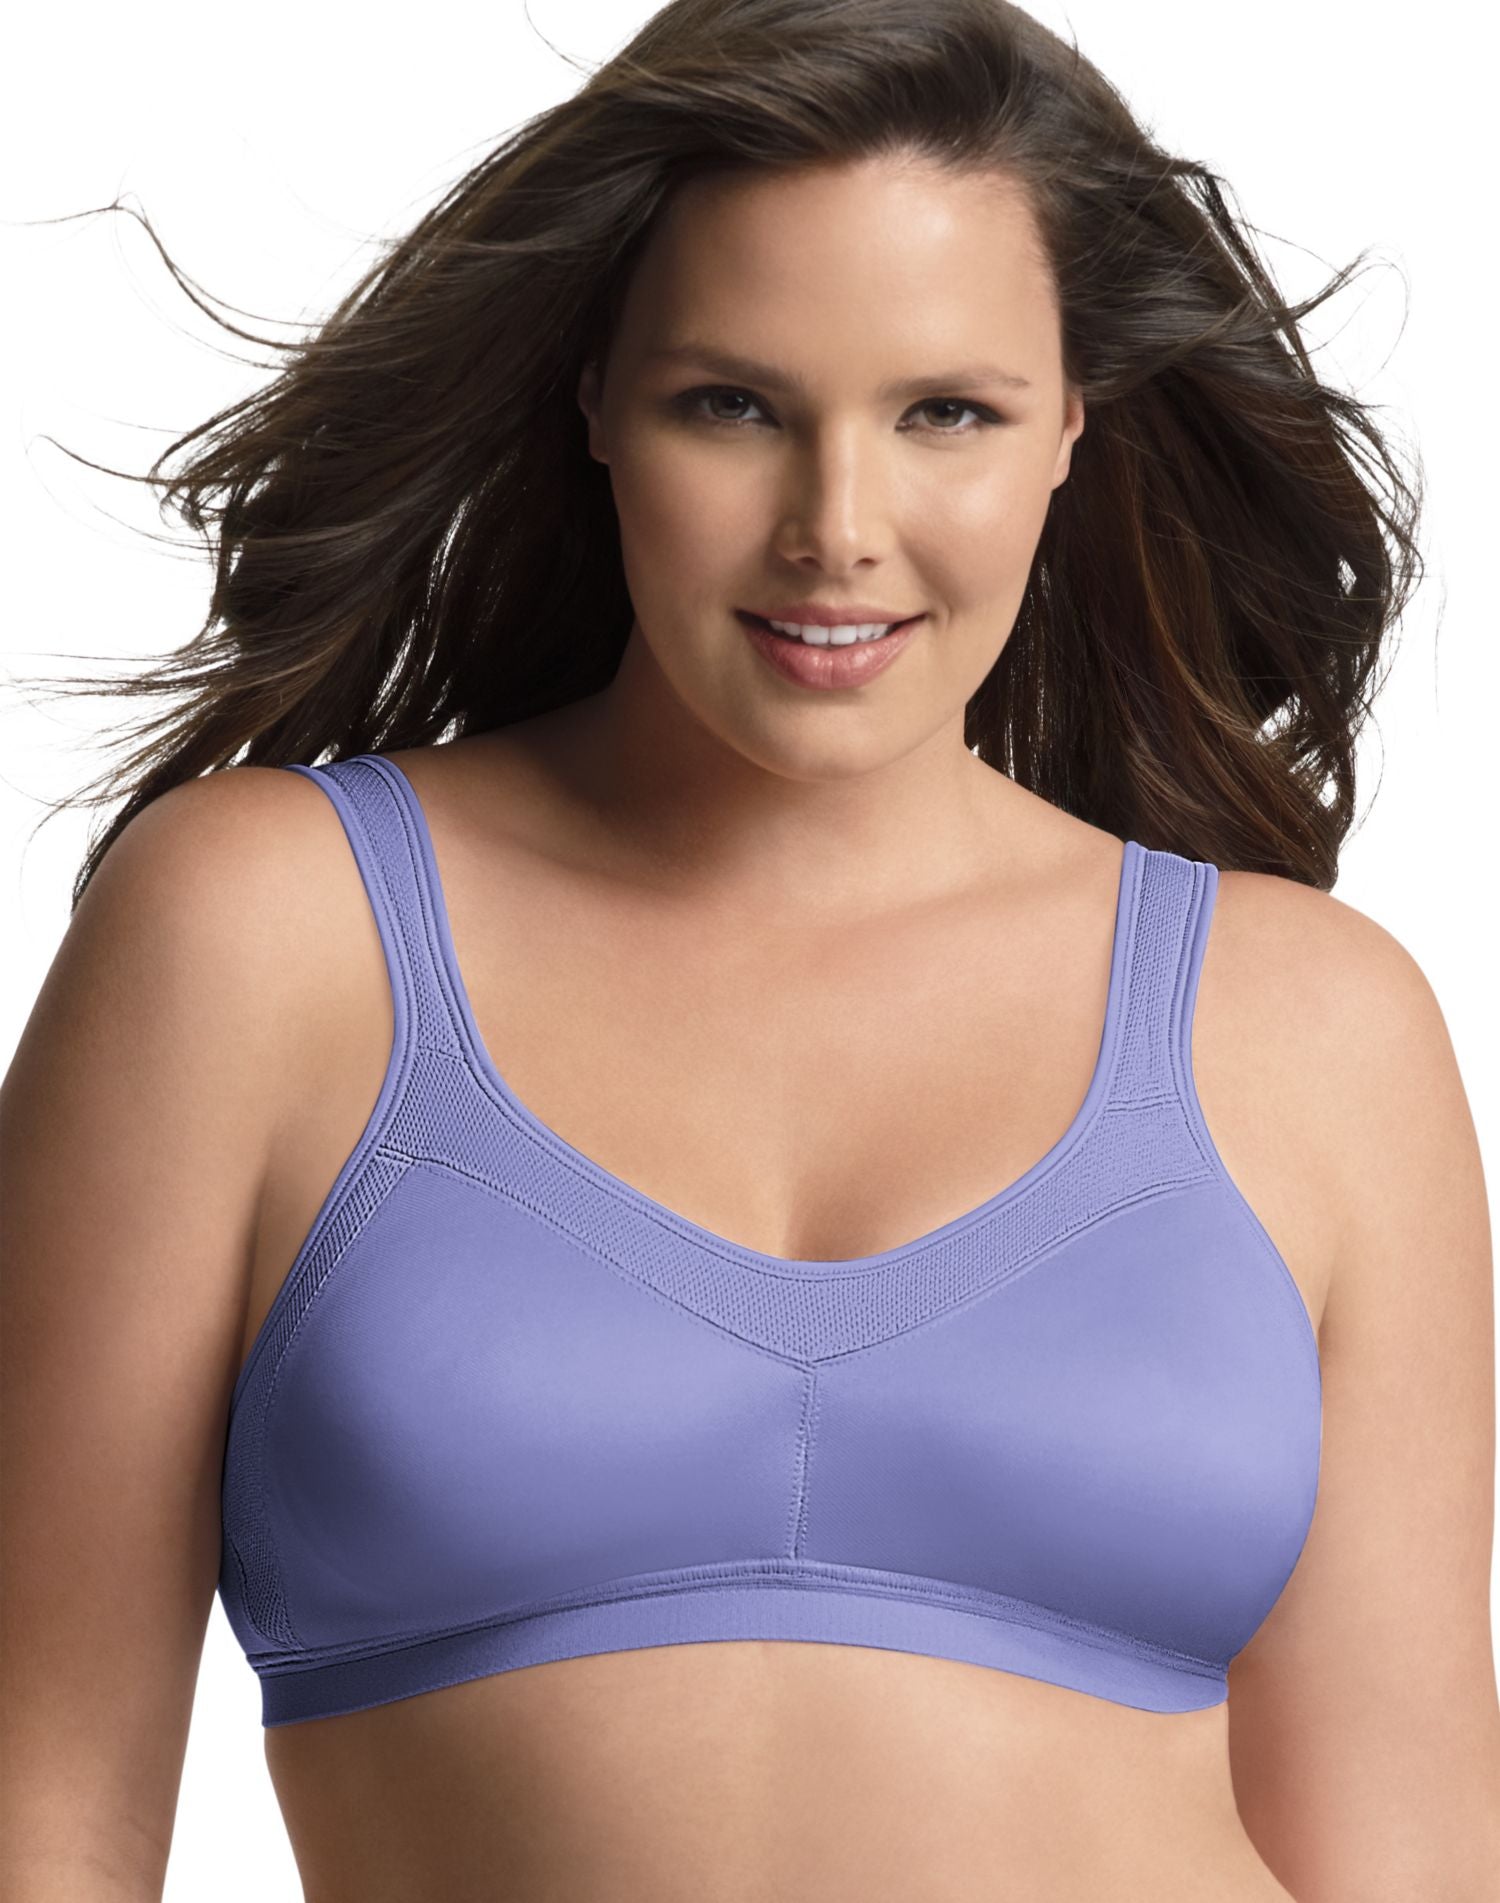 Playtex 18 Hour Active Breathable Comfort Wireless Sports Bra 4159 - 36B  NEW